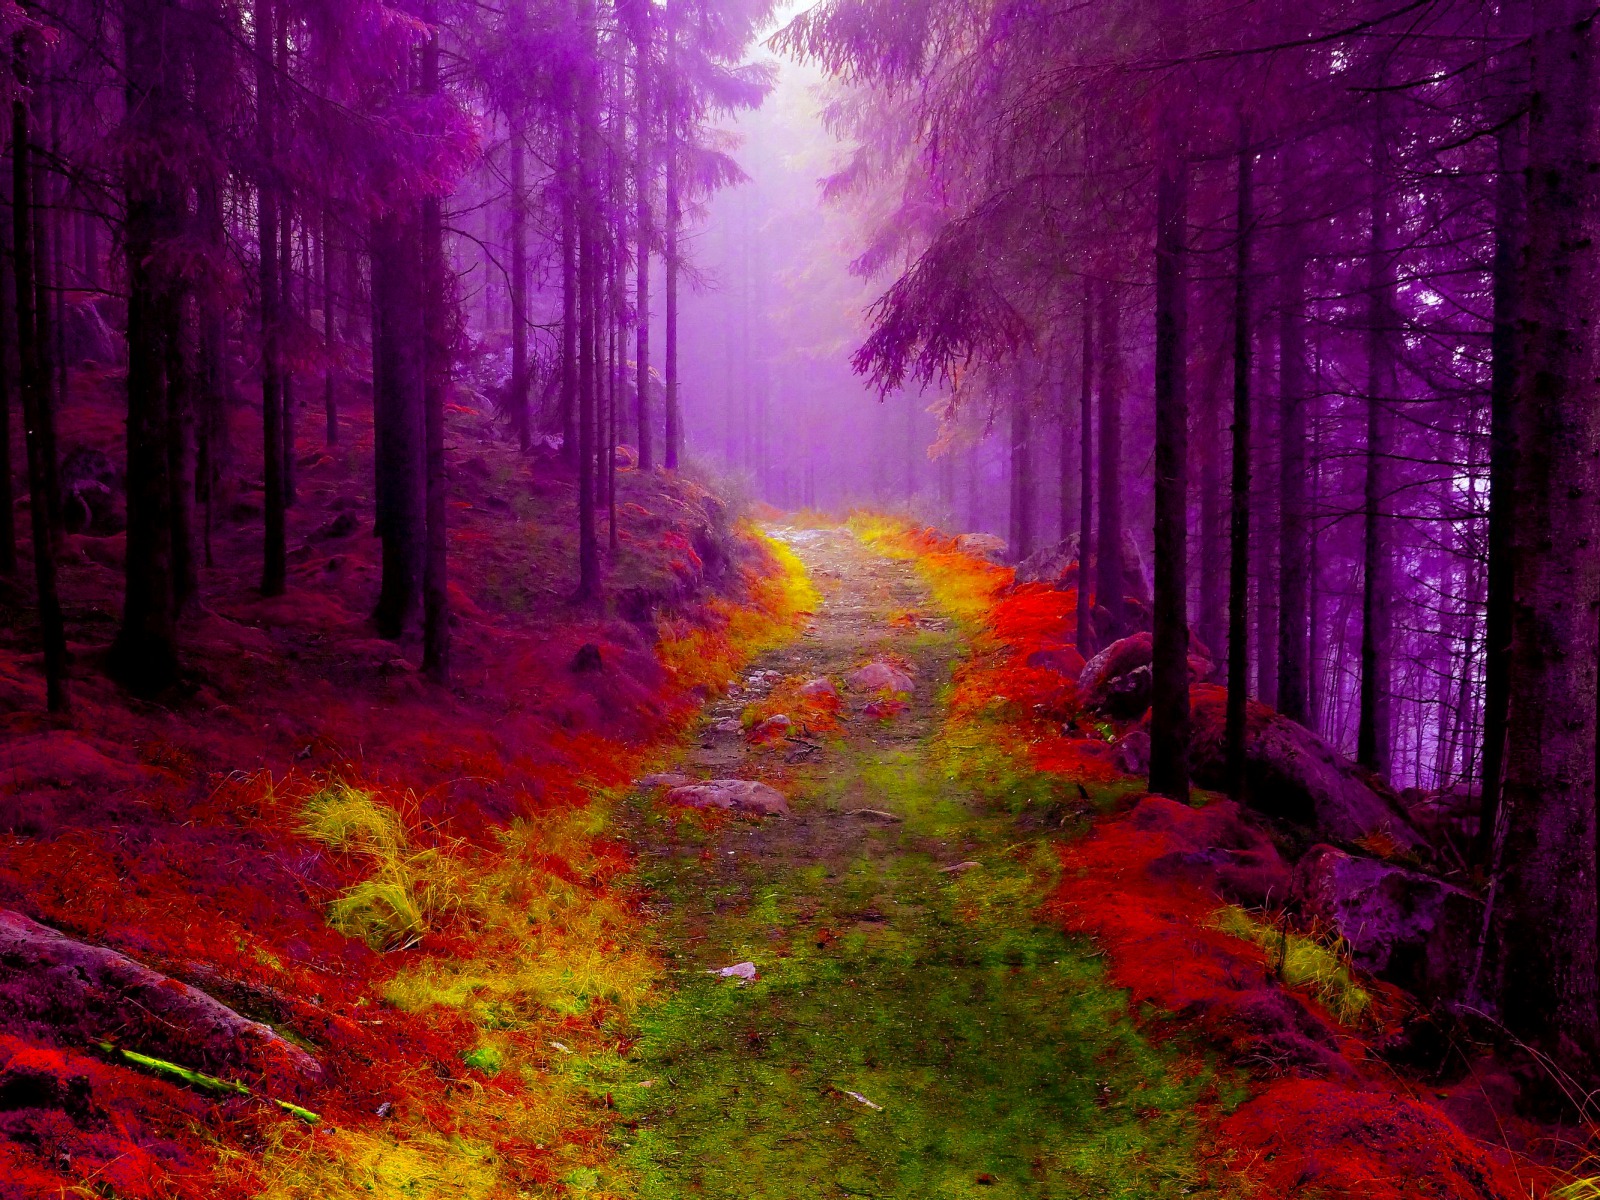 FAIRY FOREST Wallpaper and Background Image | 1600x1200 | ID:704967